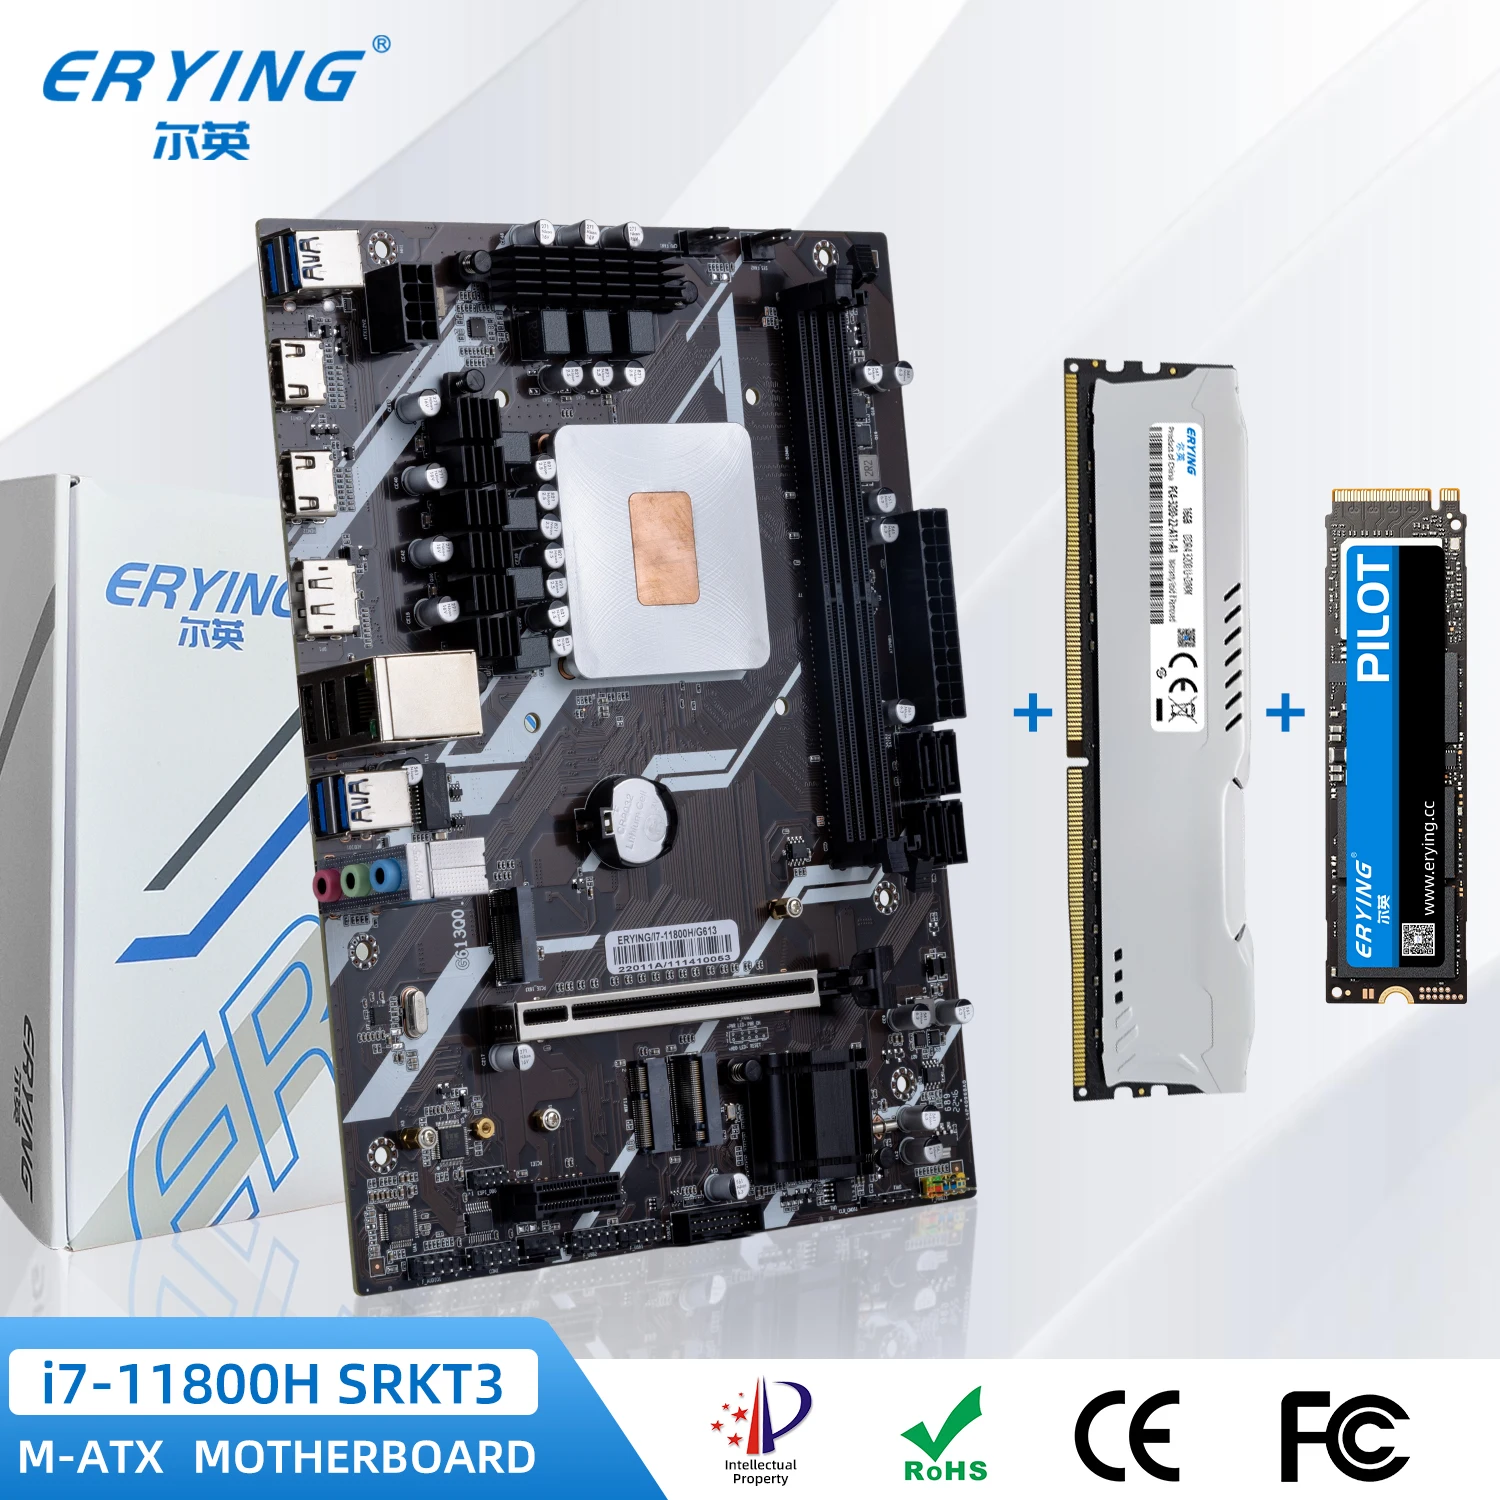 

ERYING Kit I7 Gaming PC Motherboard with Onboard CPU i7 11800H SRKT3 (NO ES) +1pc RAM 16GB 3200Mhz + 512GB SSD NVMe M.2 Set